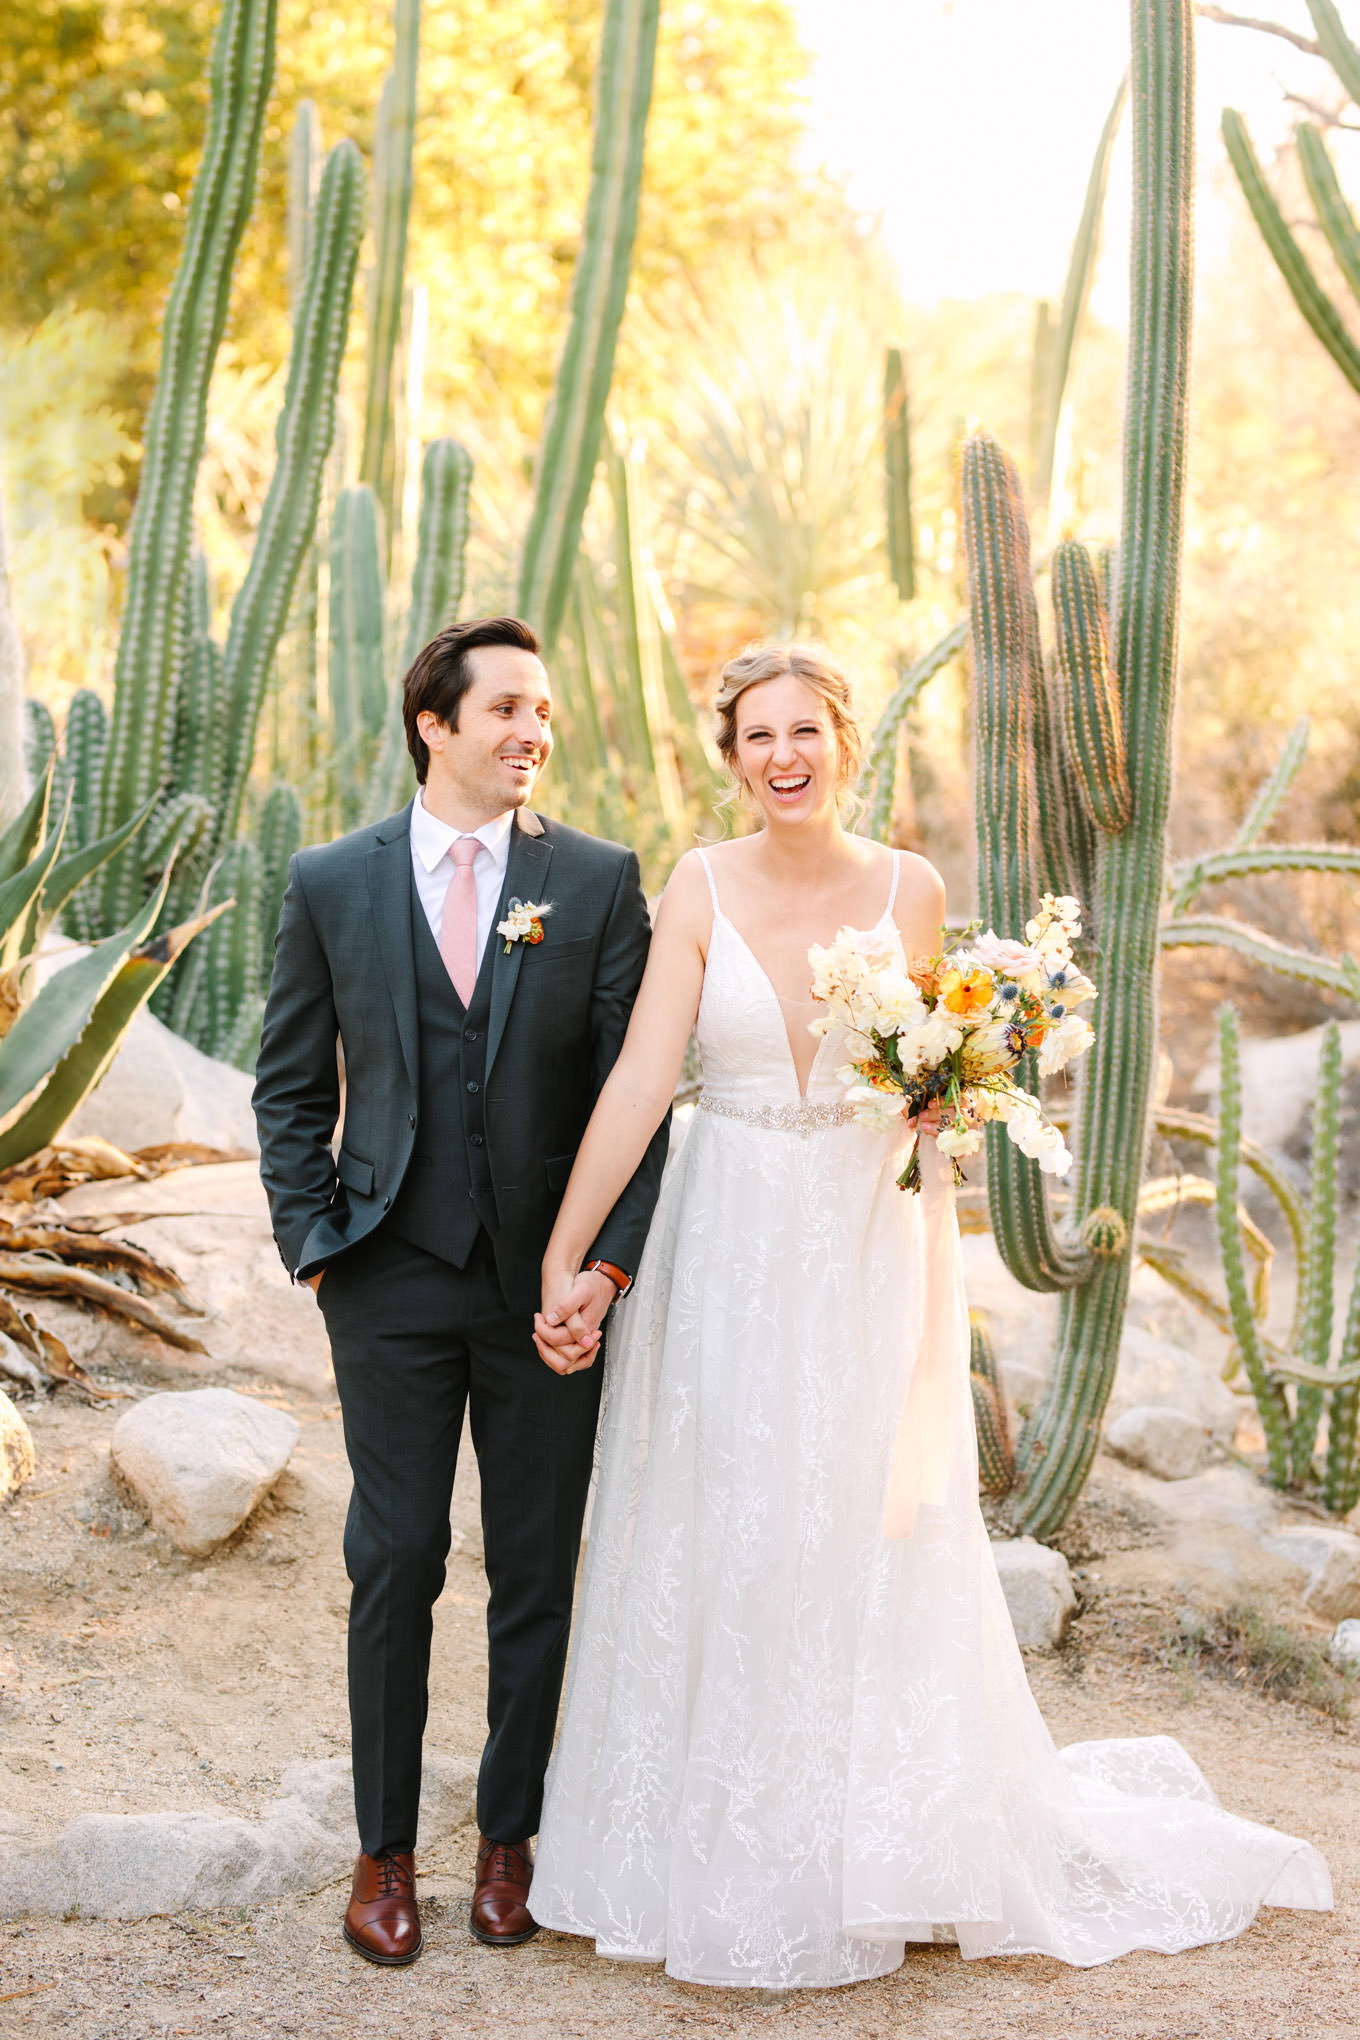 Bride and groom laughing in cactus garden | Living Desert Zoo & Gardens wedding with unique details | Elevated and colorful wedding photography for fun-loving couples in Southern California |  #PalmSprings #palmspringsphotographer #gardenwedding #palmspringswedding  Source: Mary Costa Photography | Los Angeles wedding photographer